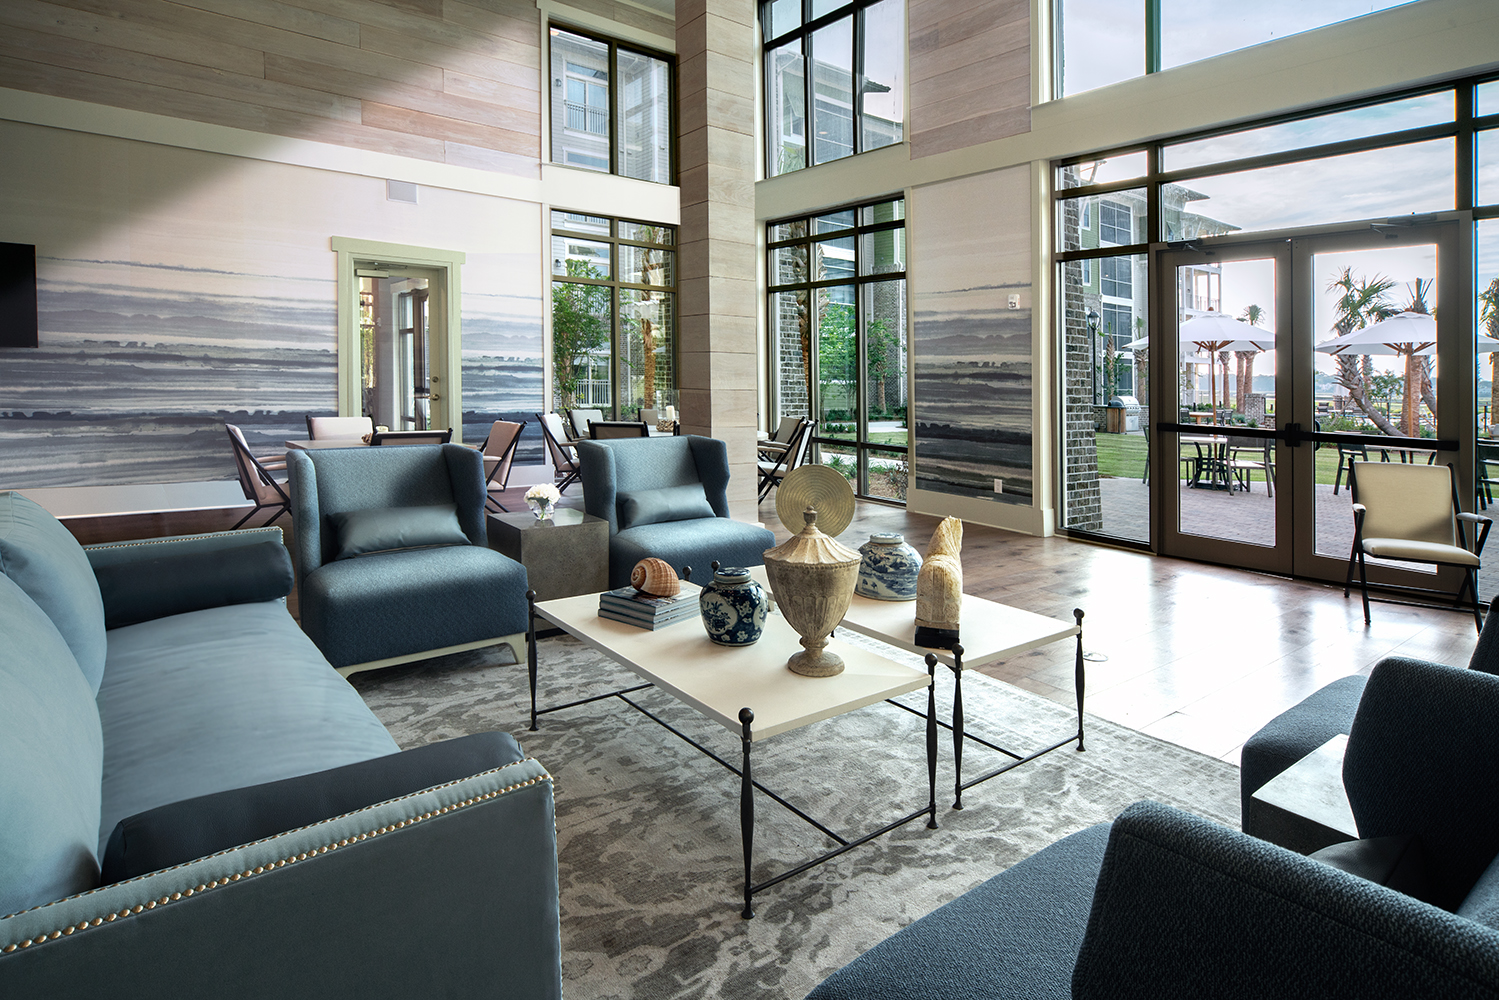 Main clubhouse sitting area in Hilton Head's Waterwalk apartment complex. Designed by Lisa Whitley of J. Banks Design Group.